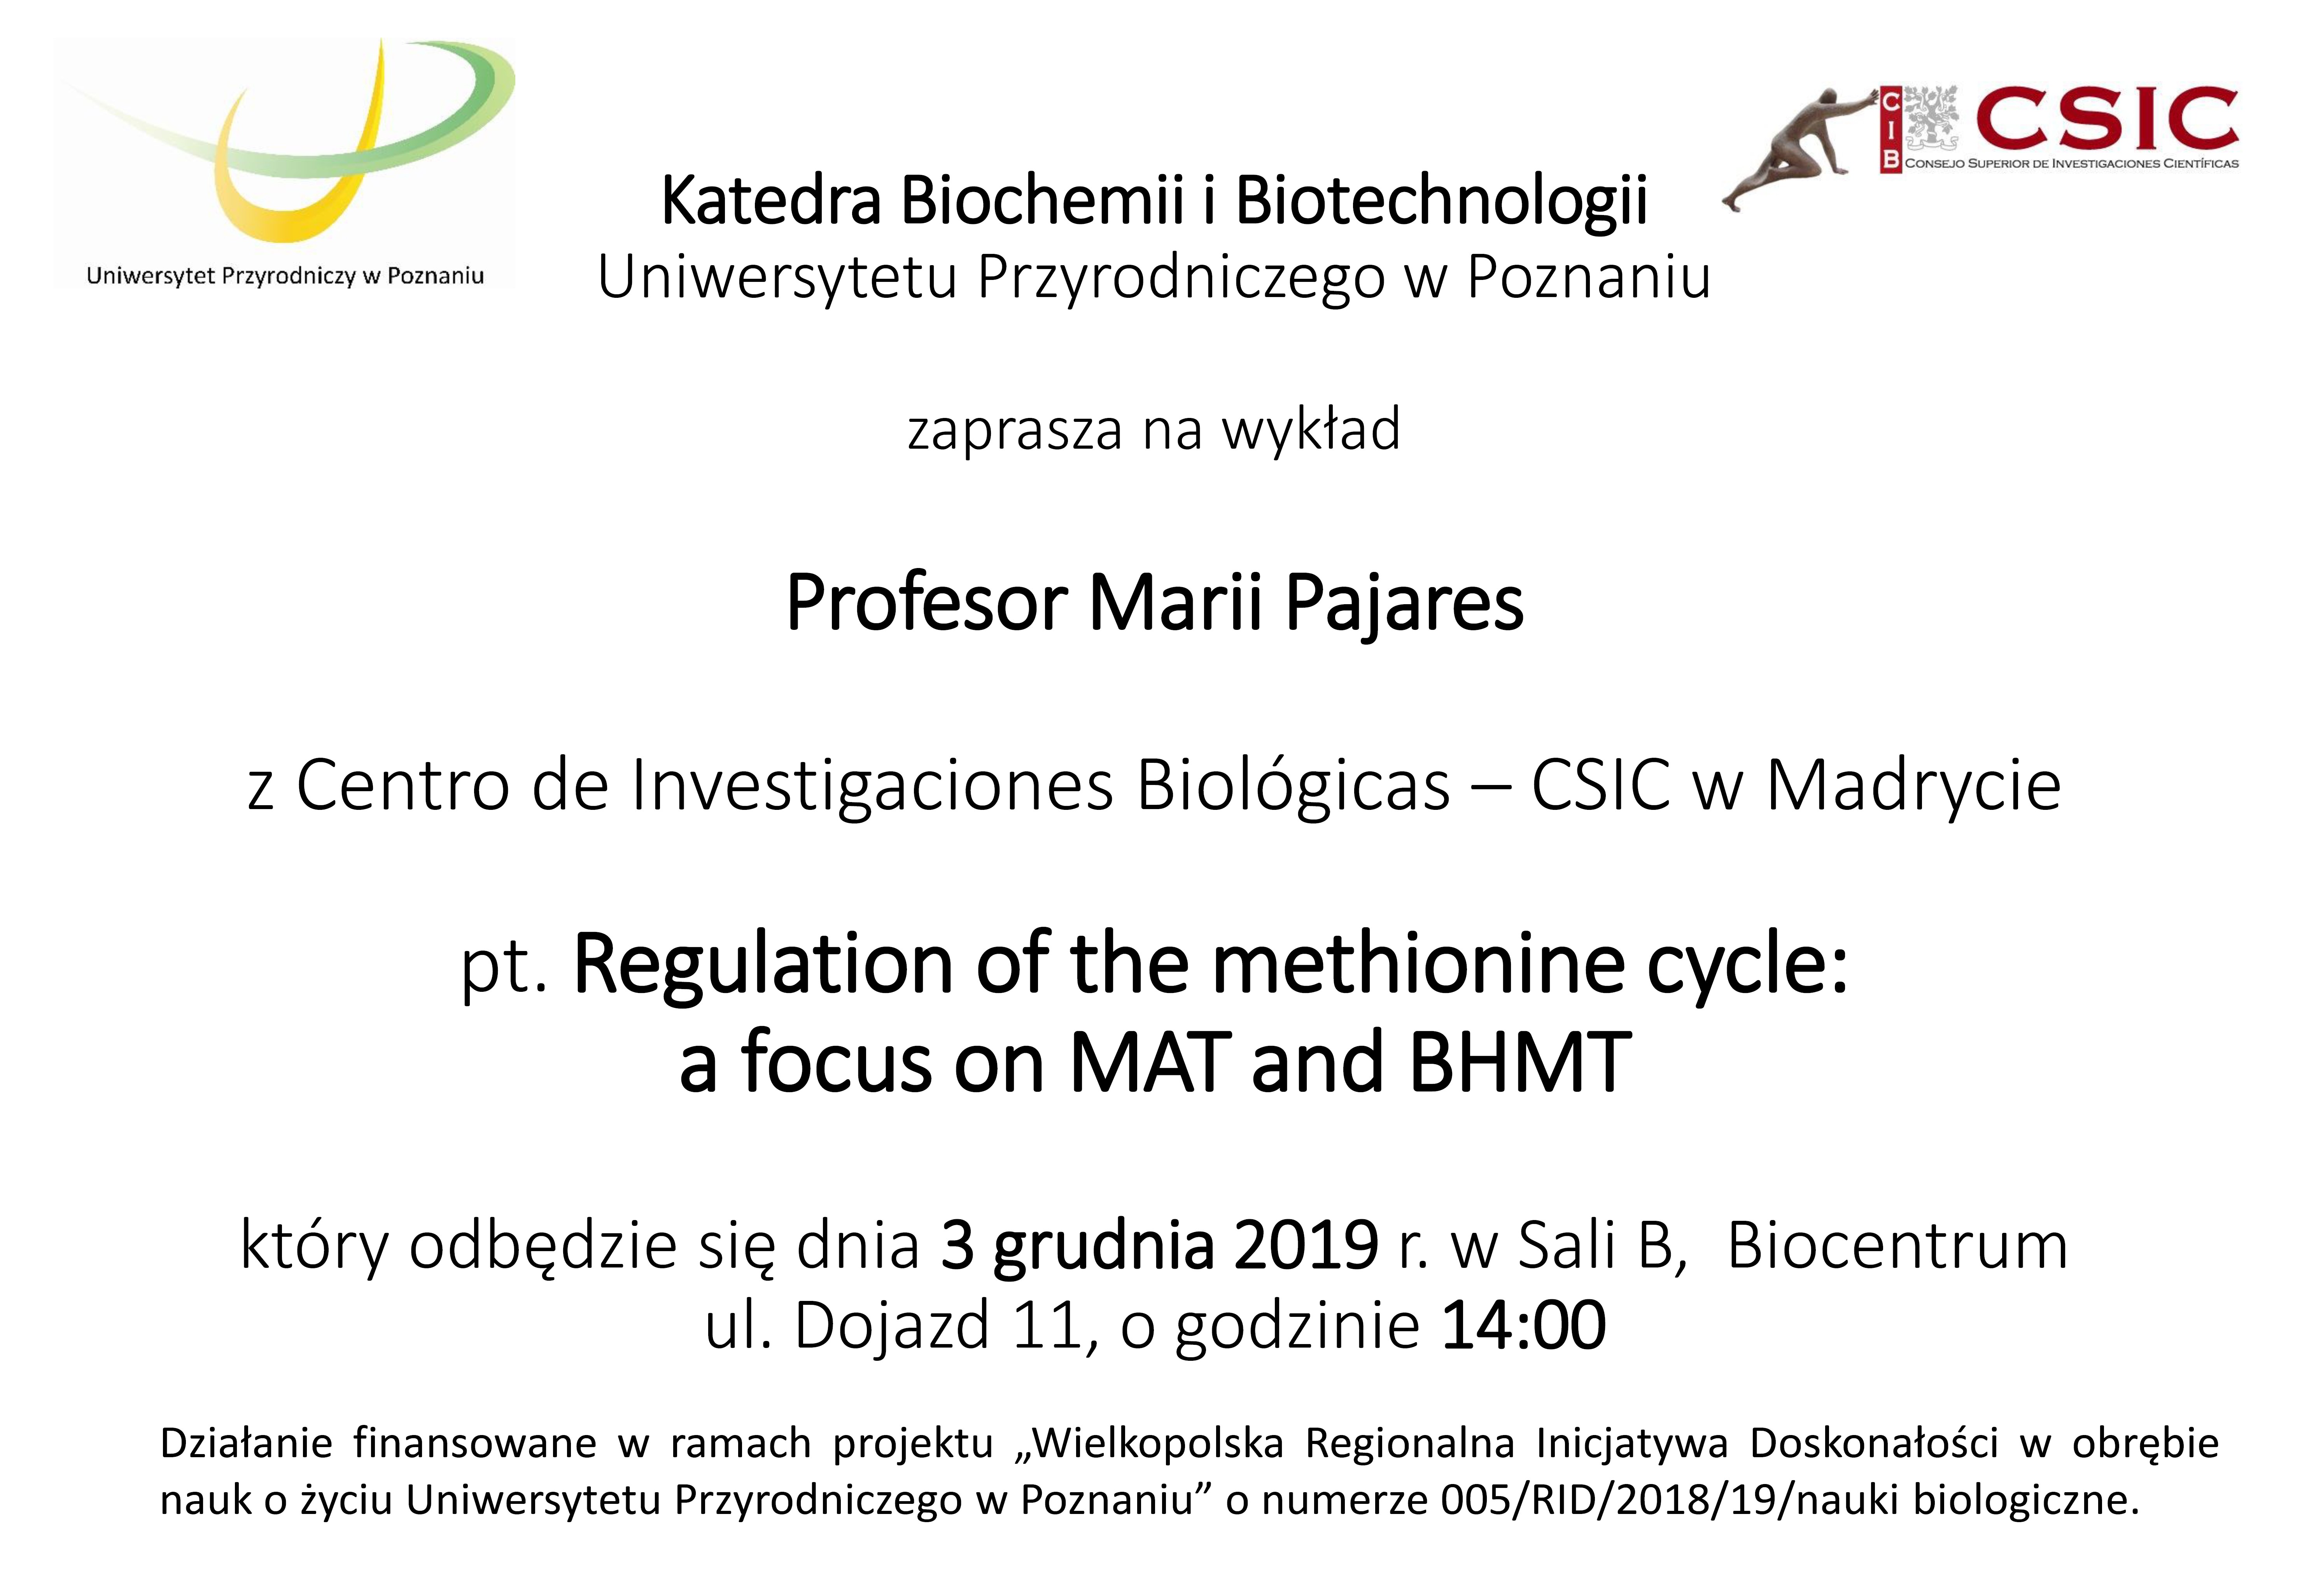 Wykład prof. Marii Pajares - Regulation of the methionine cycle: a focus on MAT and BHMT